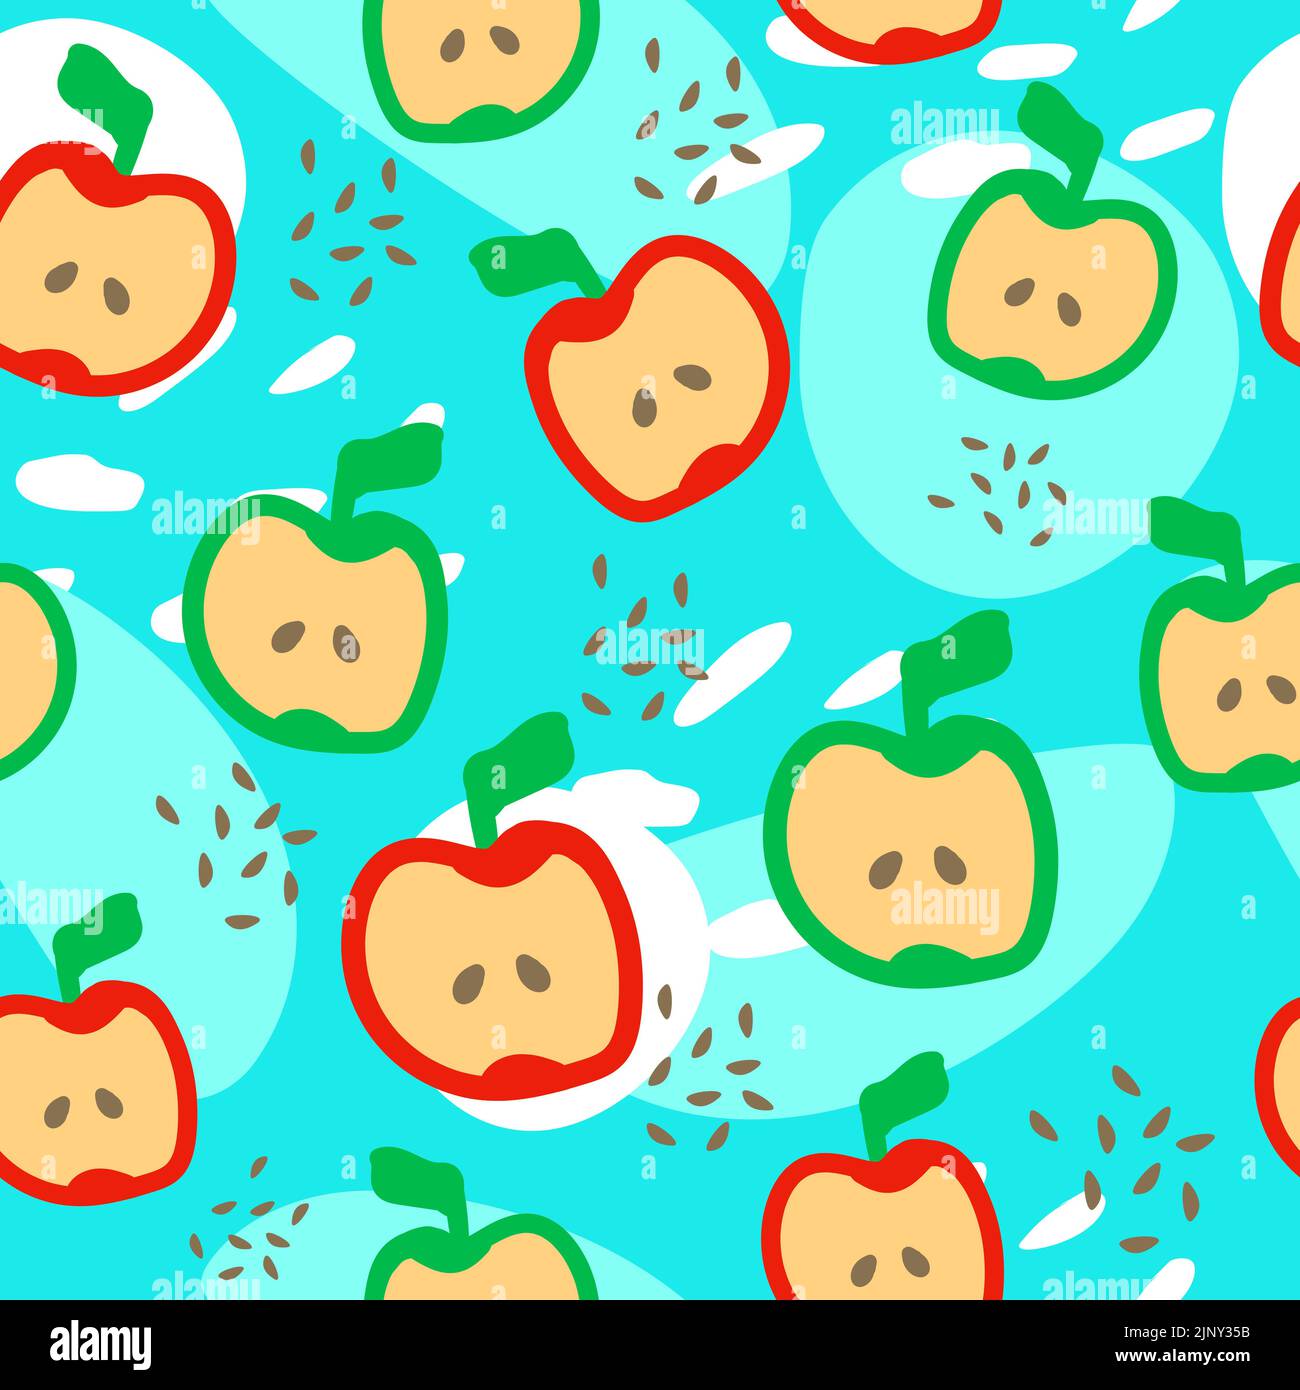 Apple cut fruit seamless pattern in vector flat style. Summer tropical background. Stock Vector